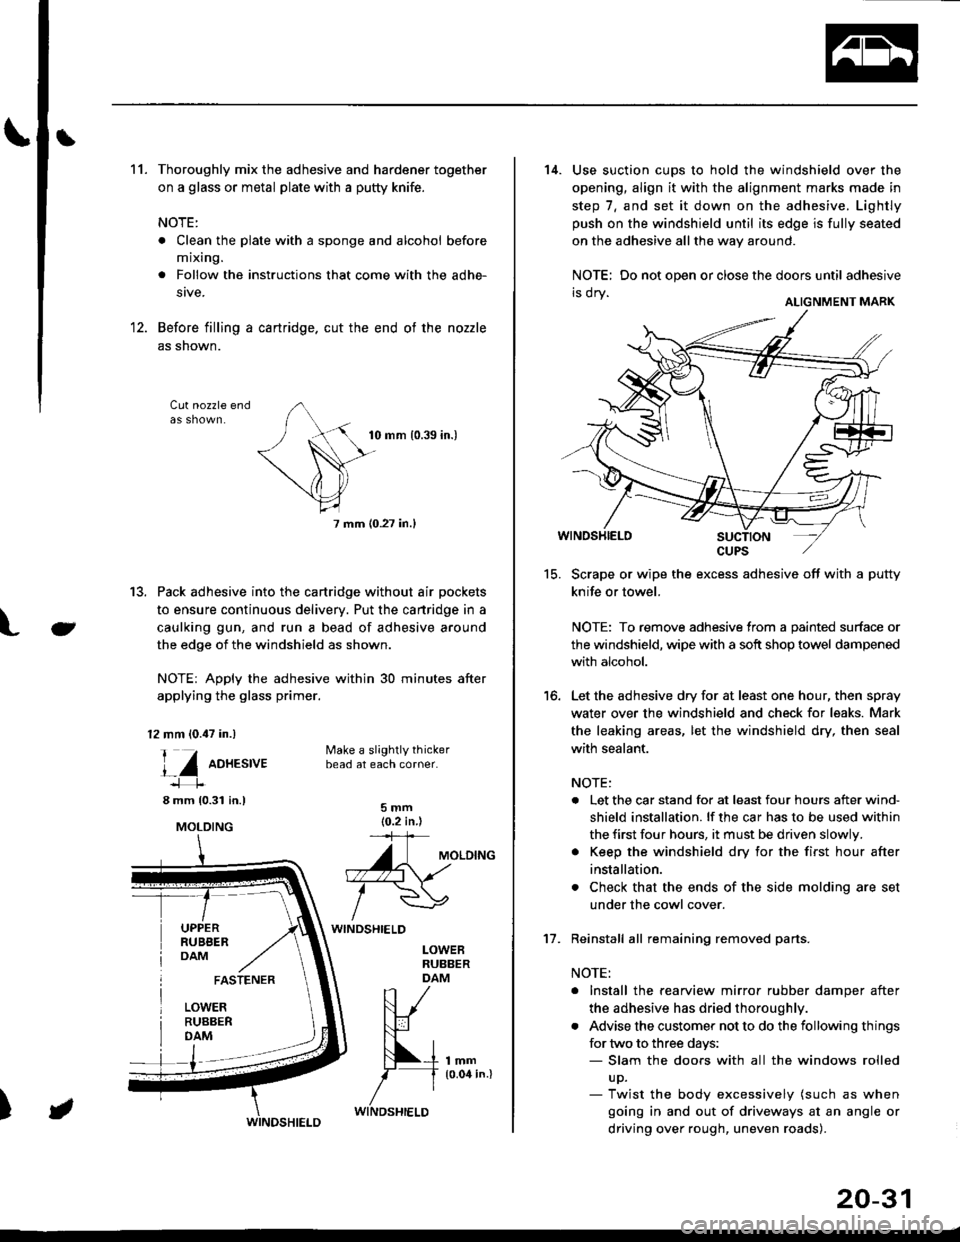 HONDA CIVIC 1996 6.G Workshop Manual 3
11.Thoroughly mix the adhesive and hardener together
on a glass or metal plate with a putty knife.
NOTE:
. Clean the plate with a sponge and alcohol before
mixing.
. Follow the instructions that com